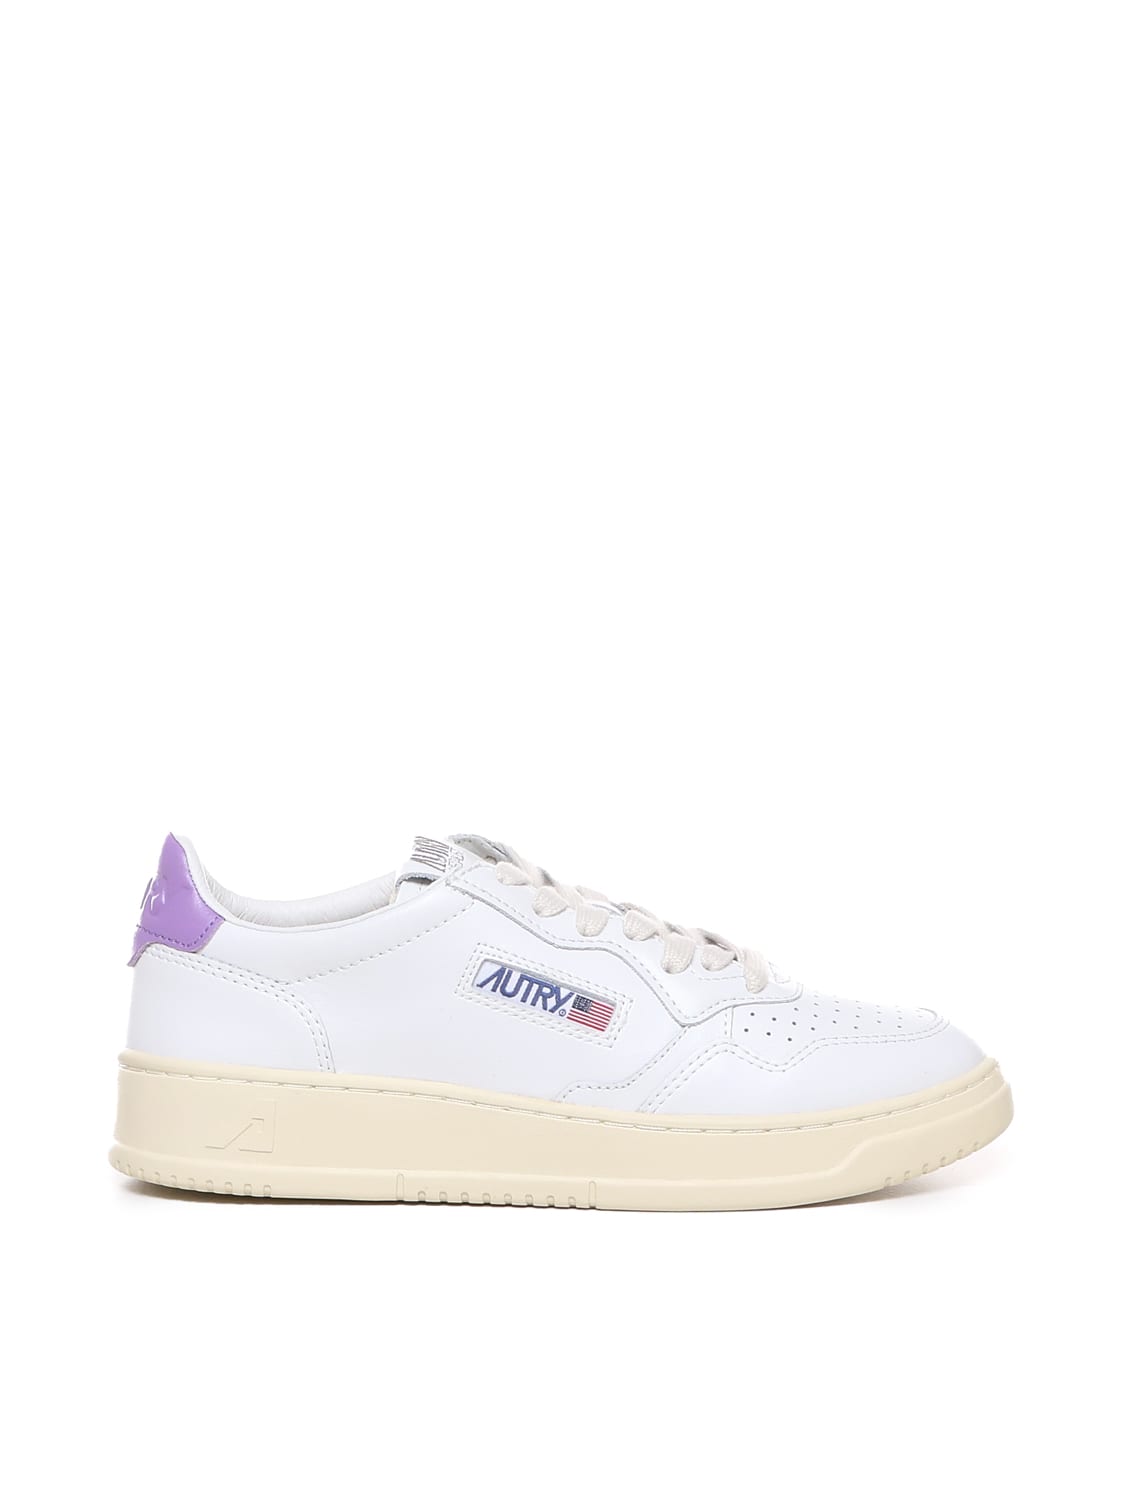 Autry Sneakers Medalist Basse In Pelle In White, Lillac